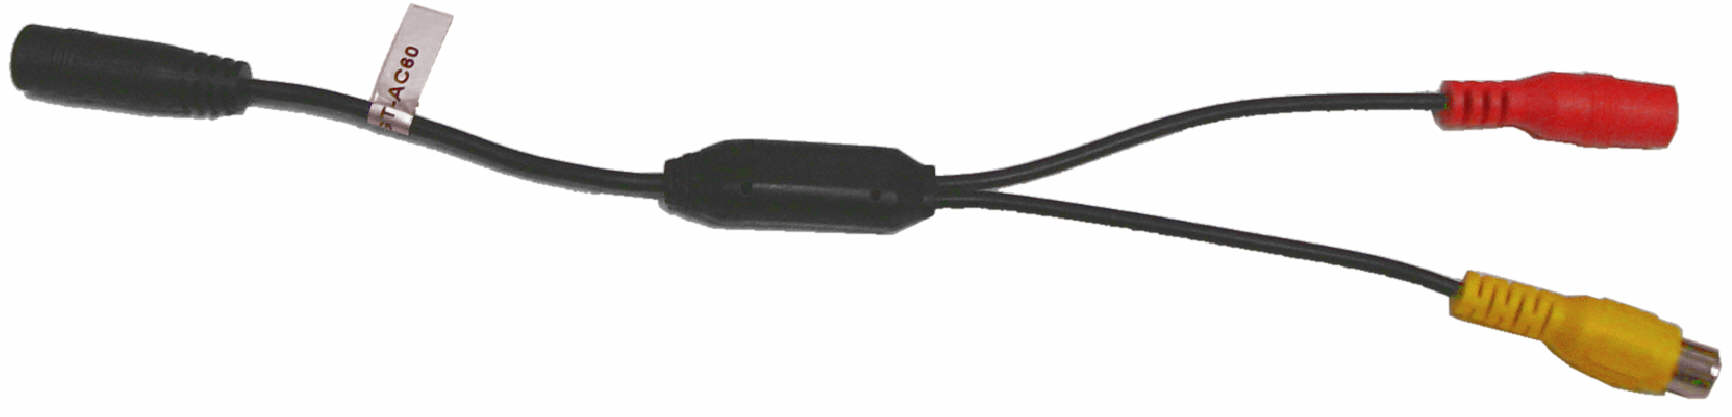 RCA & Pwr Pigtail for Stud Mount Cameras